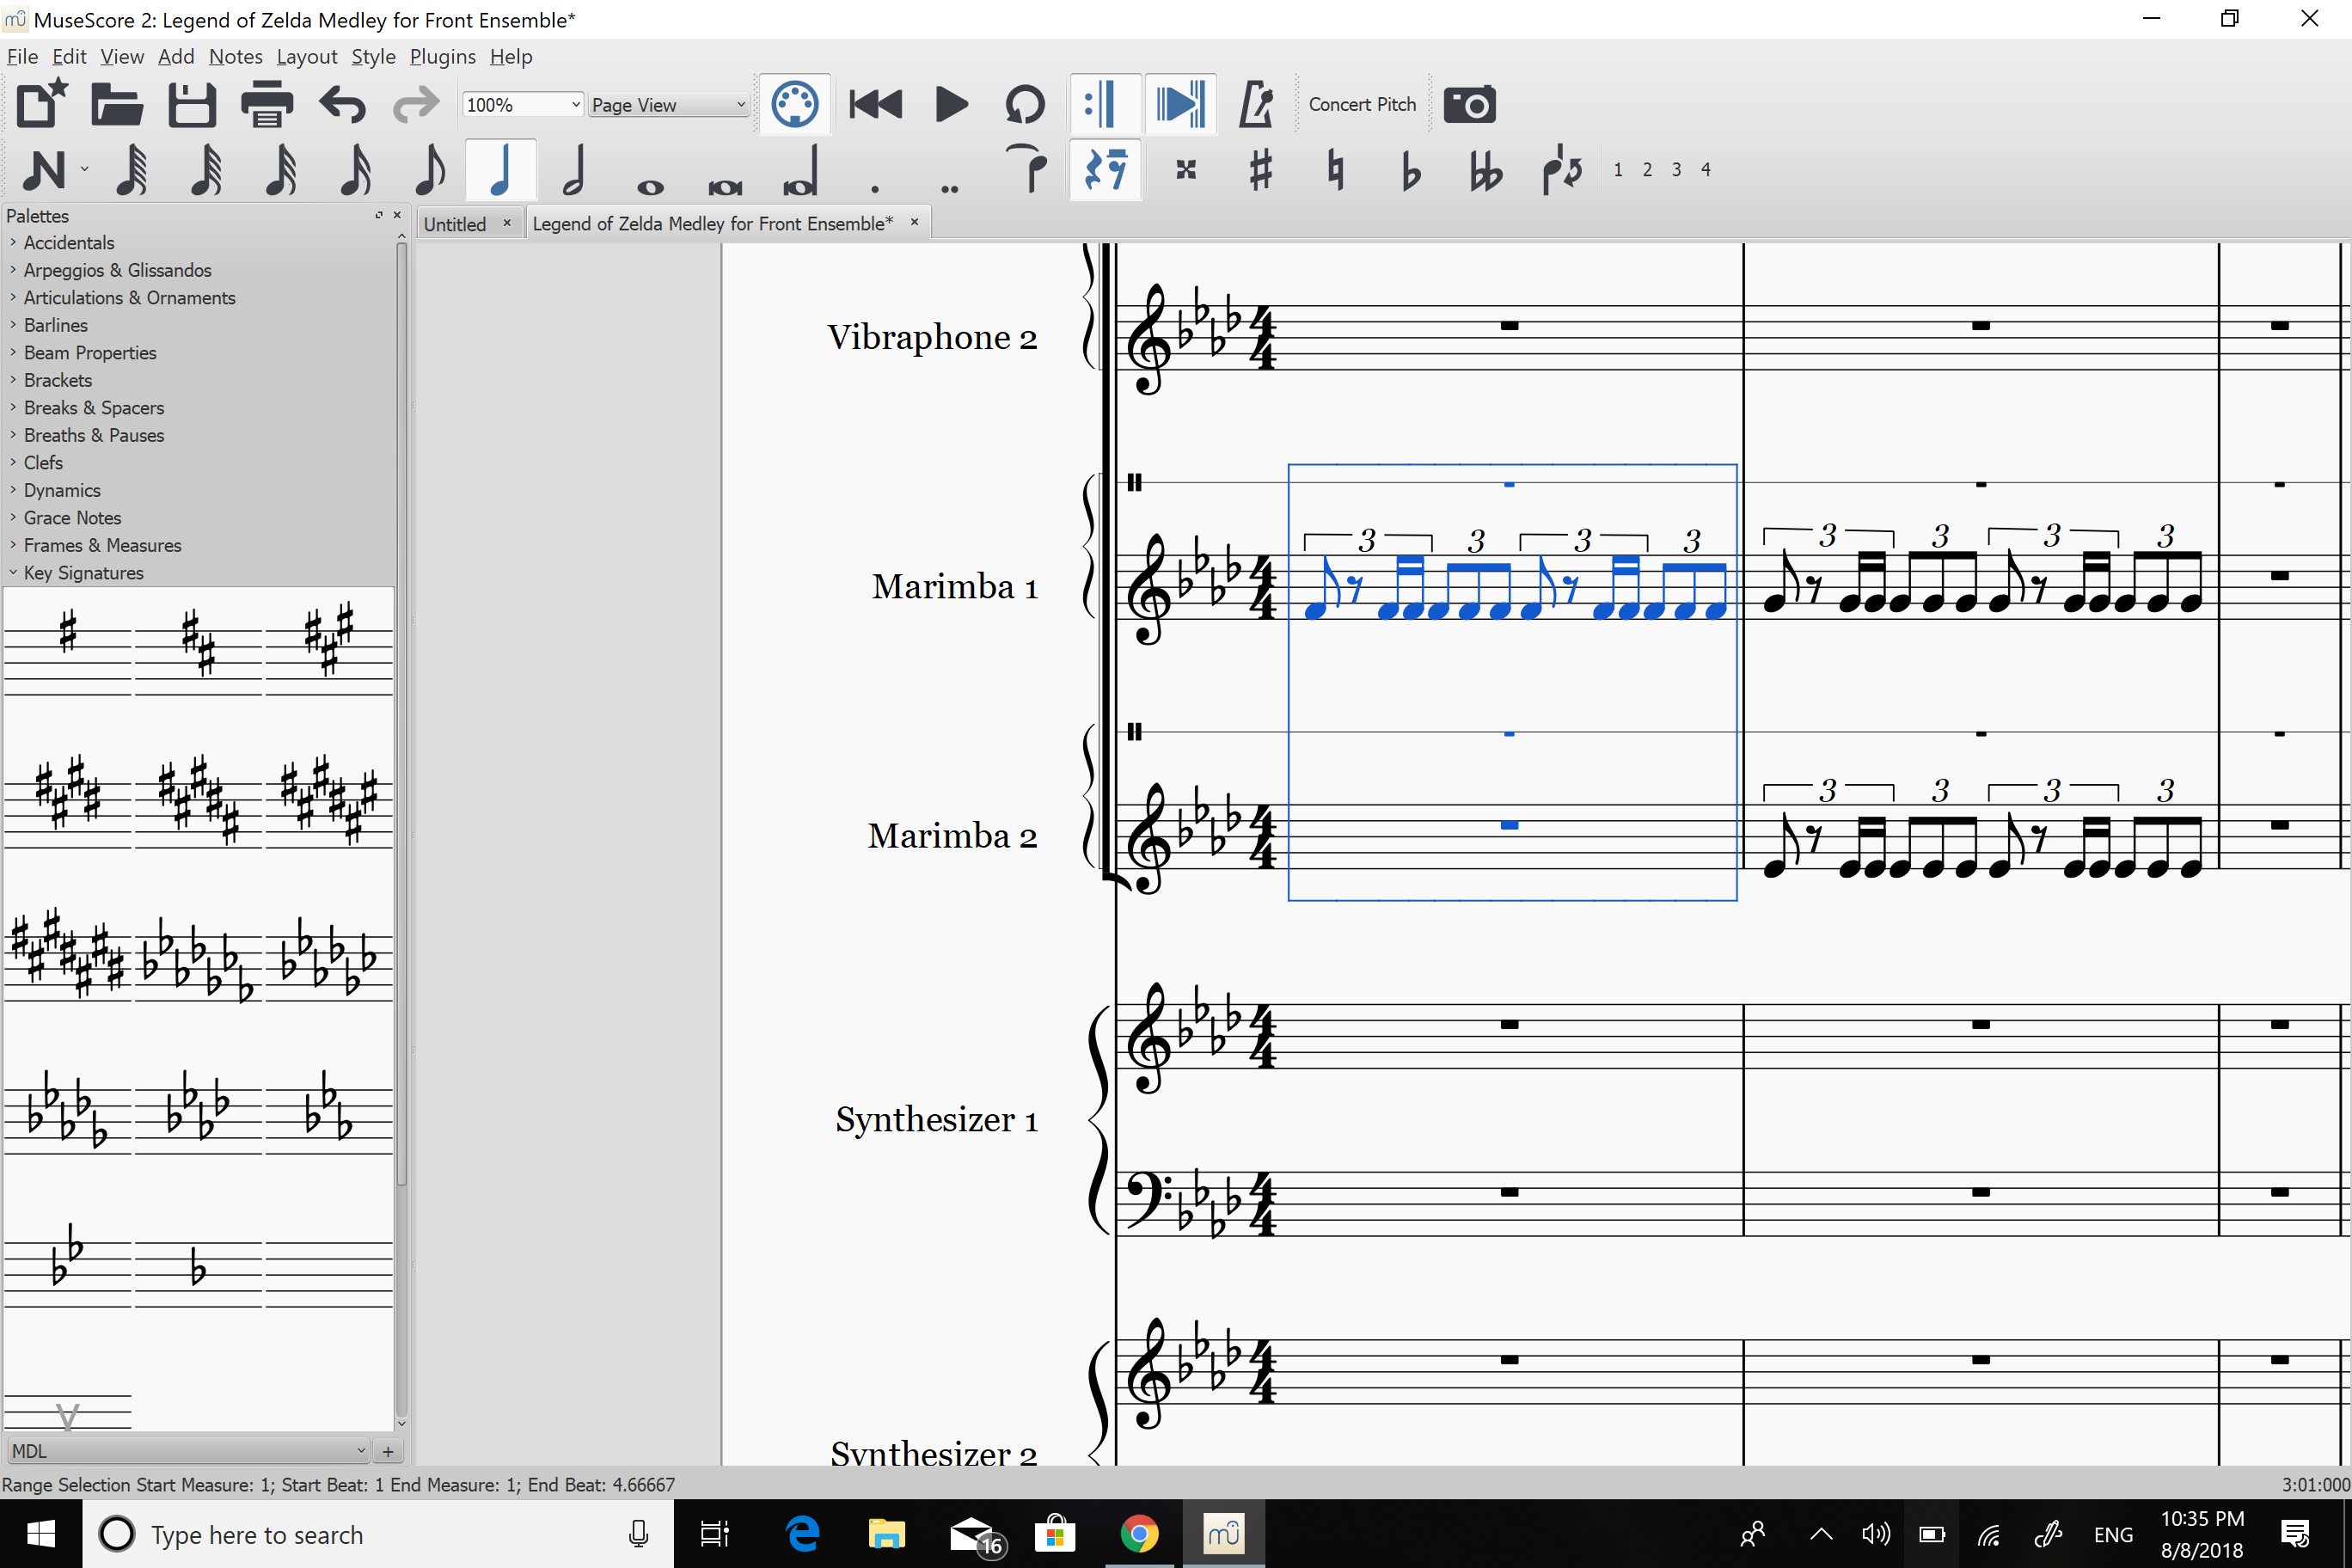 download the new MuseScore 4.1.1